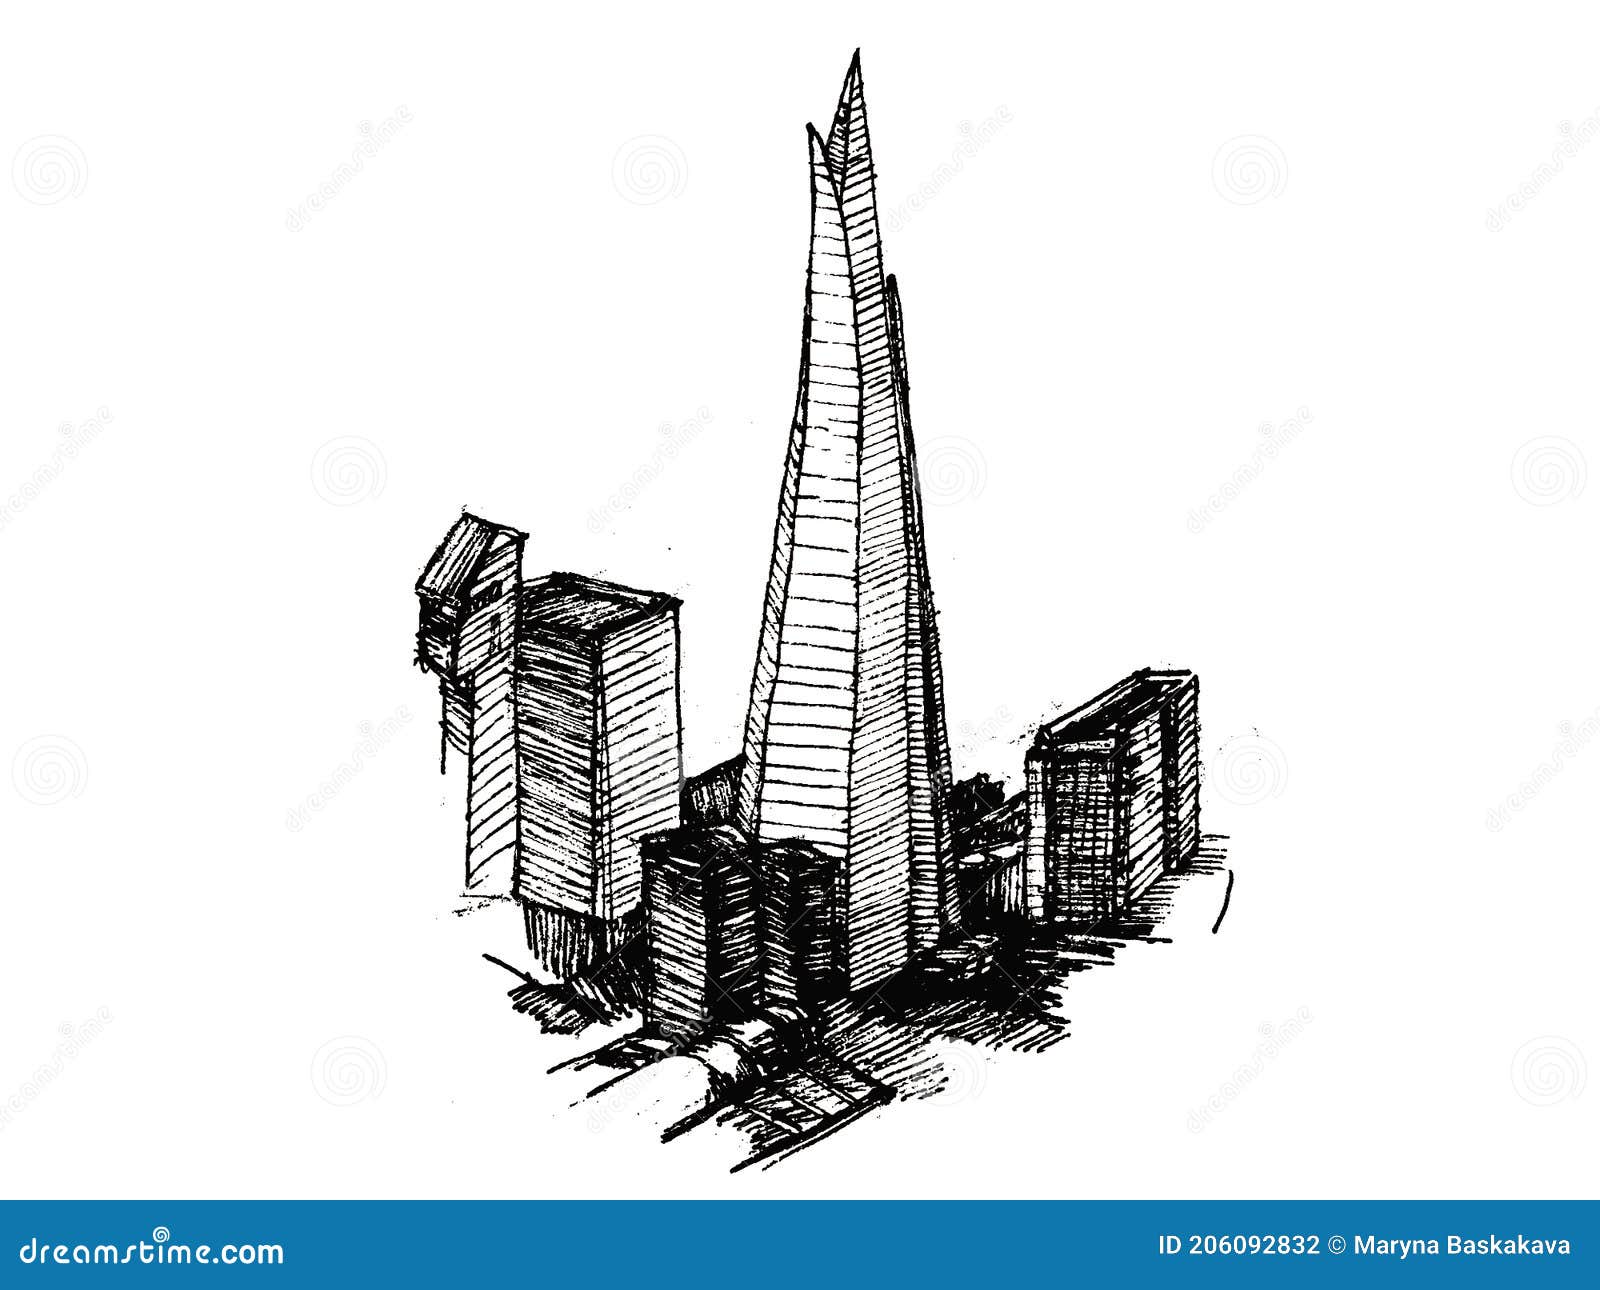 Hybrid evacuation strategy. 'The Shard'. Building Workshop. Drawing by... |  Download Scientific Diagram